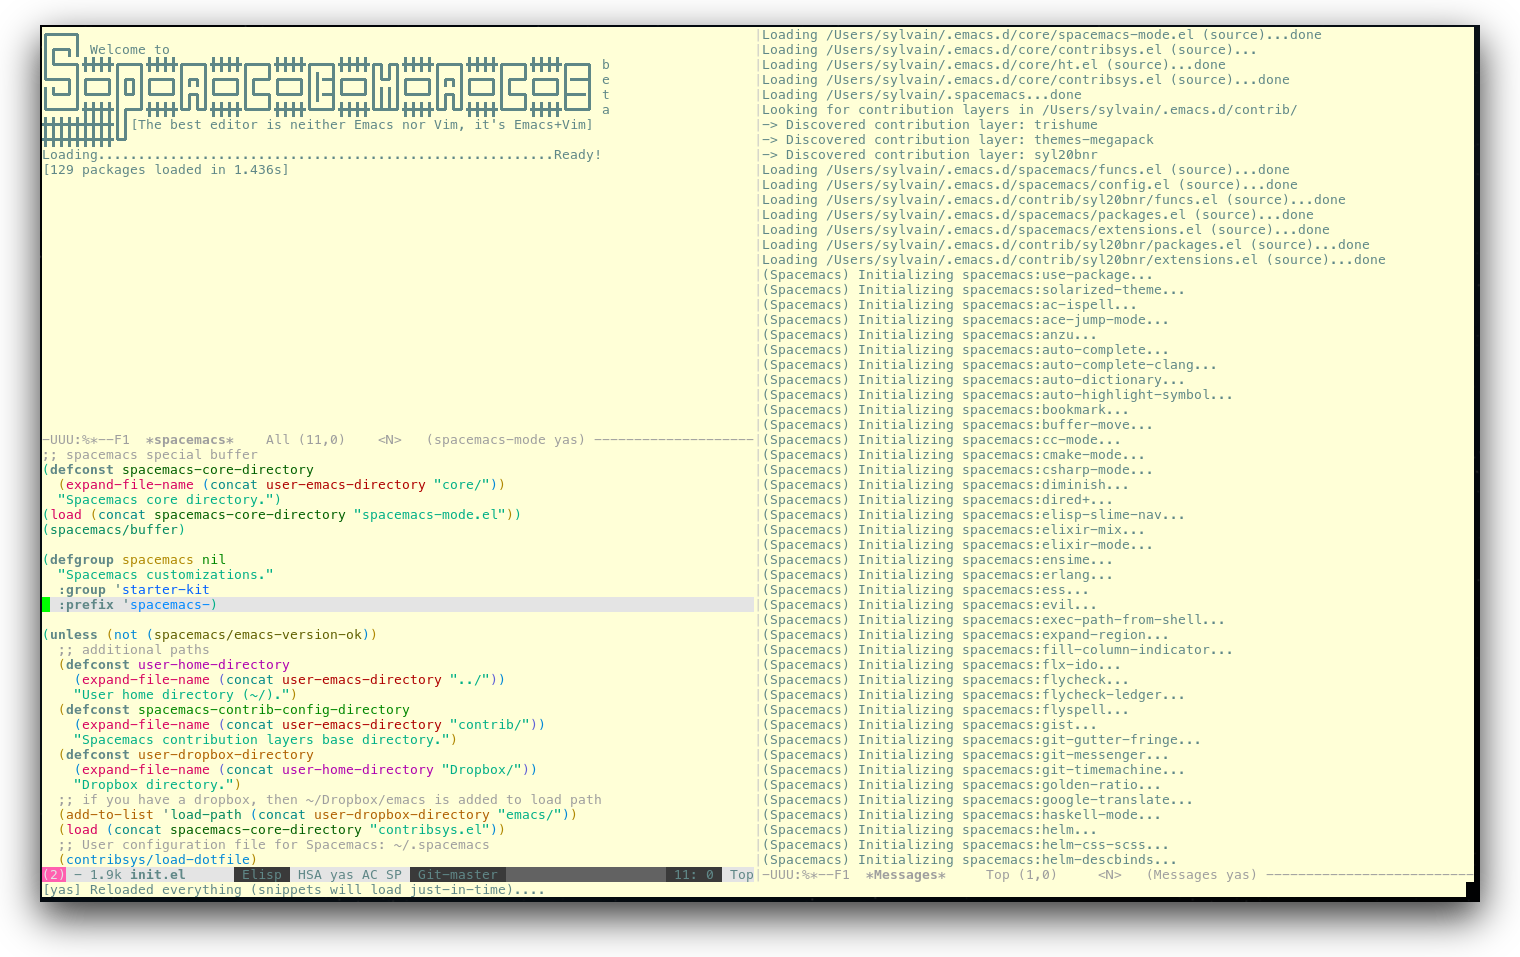 /TakeV/spacemacs/media/commit/7274d9d5c2924fffe1334be14a6daf099c332c81/doc/img/spacemacs-urxvt.png